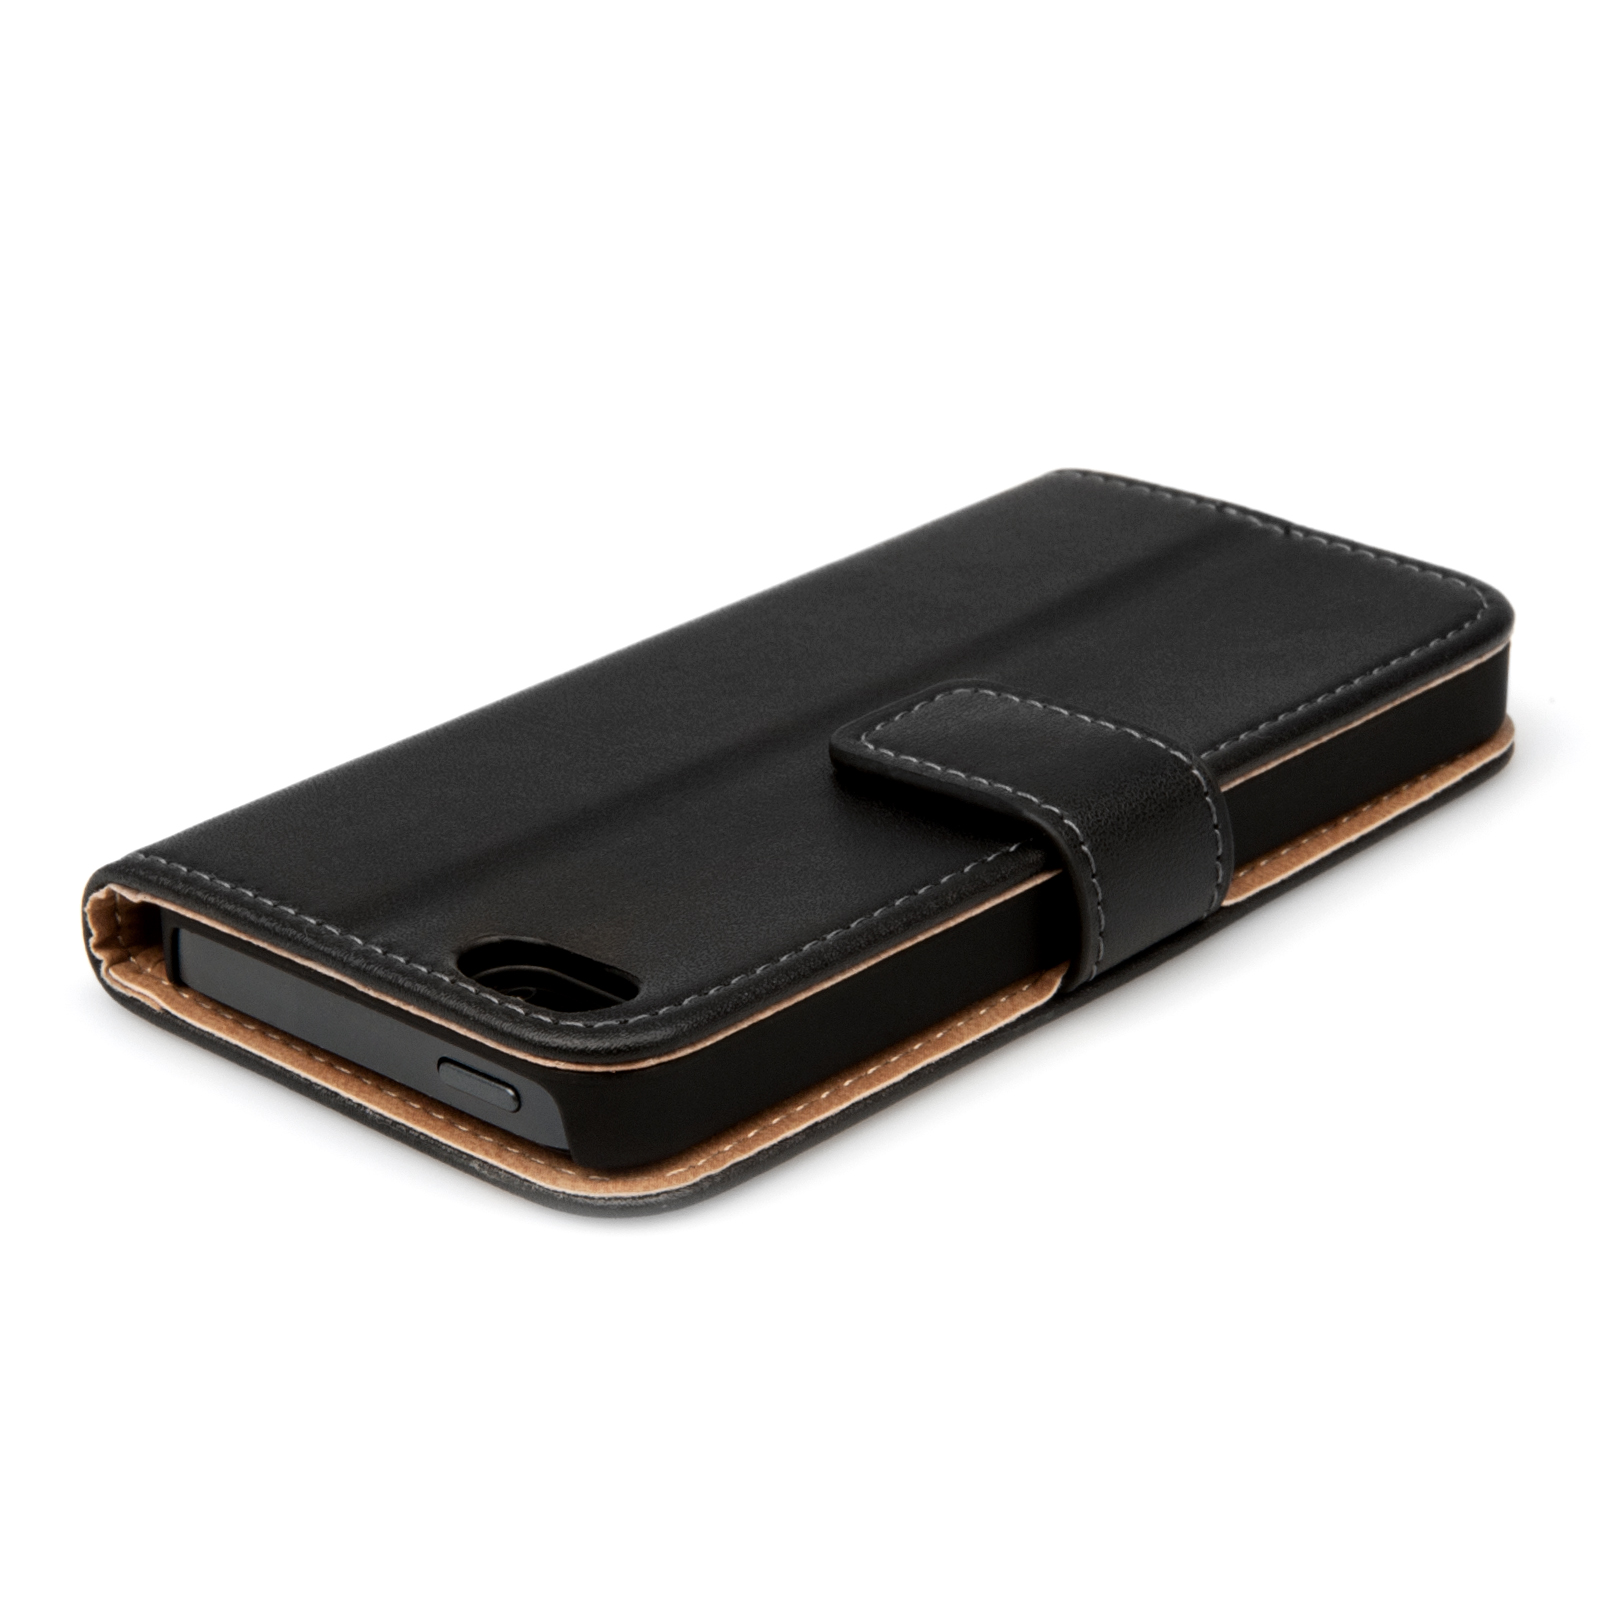 Caseflex iPhone 5 / 5S Real Leather Stand Wallet Case - Black